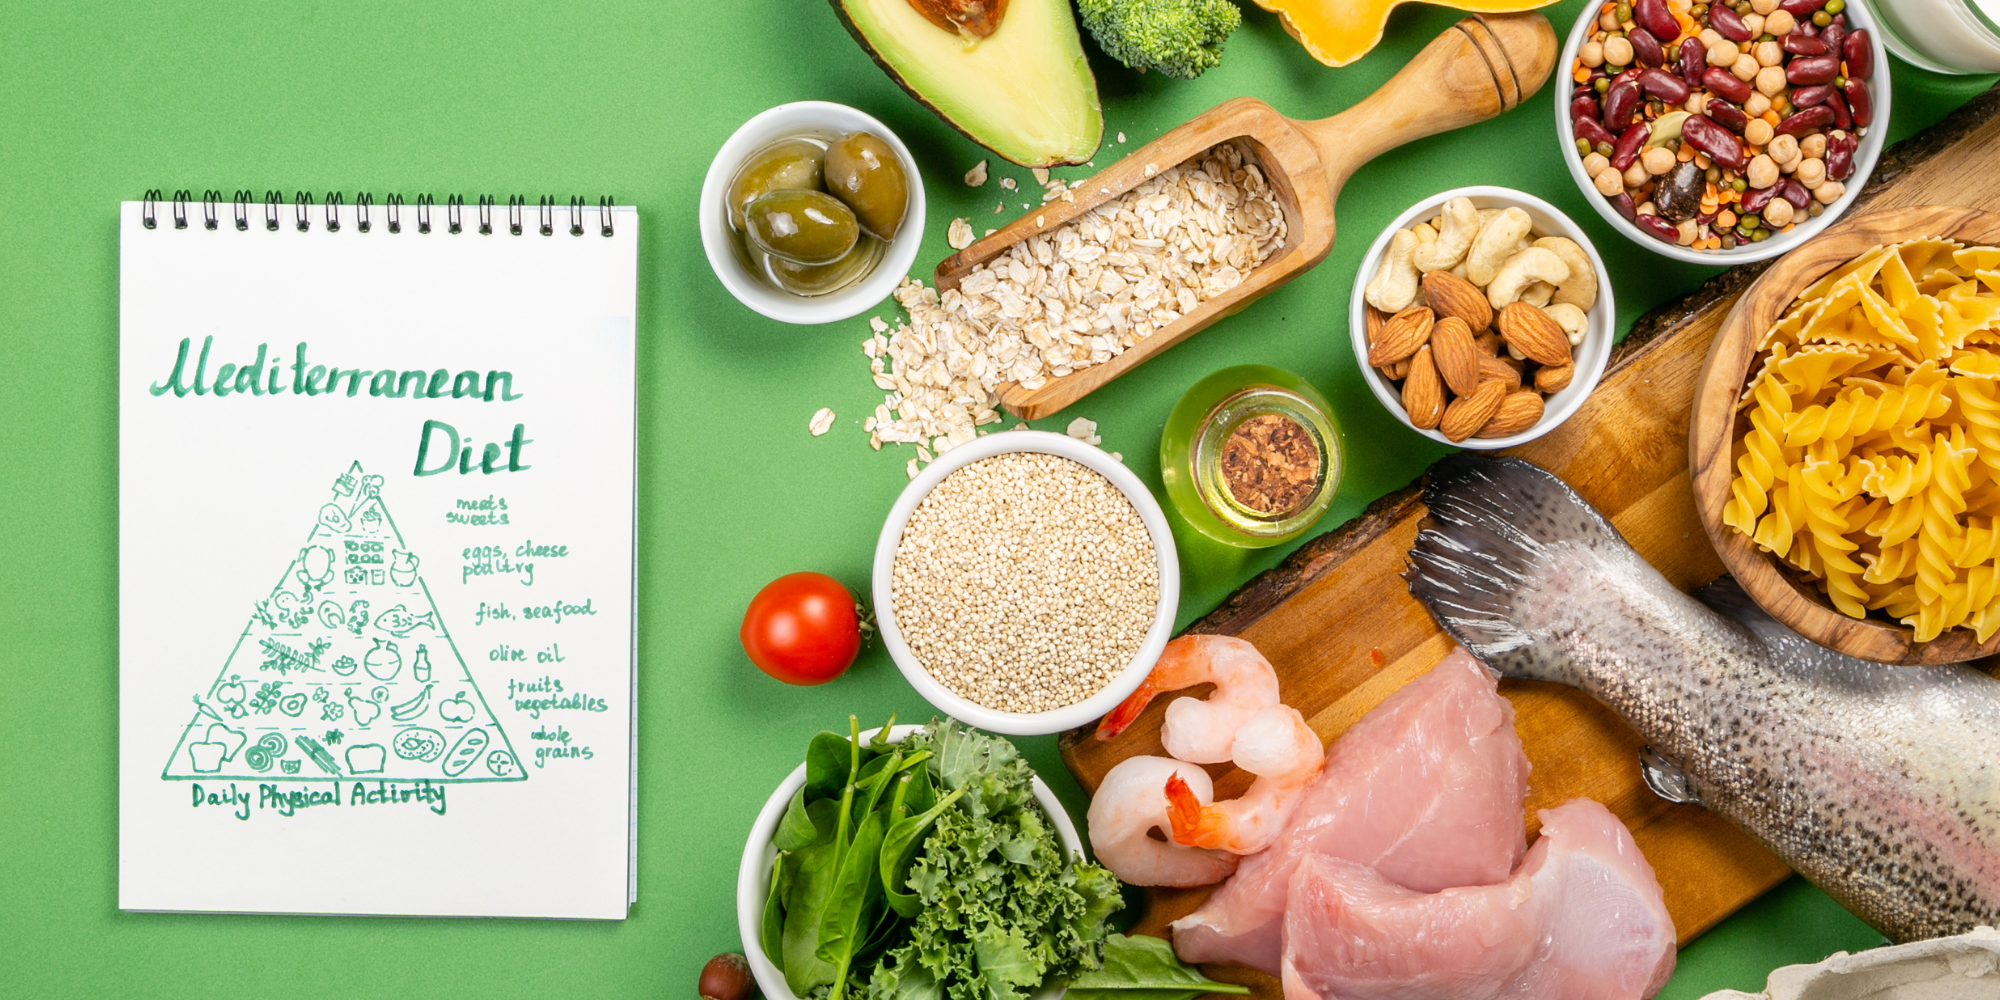 Components of a Mediterranean diet scattered to the right of the screen (avocado, olive oil, whole grains, seafood, white poultry) against a green background. To the Right of the image is a notebook with green marker outlining the Mediterranean diet food pyramid 